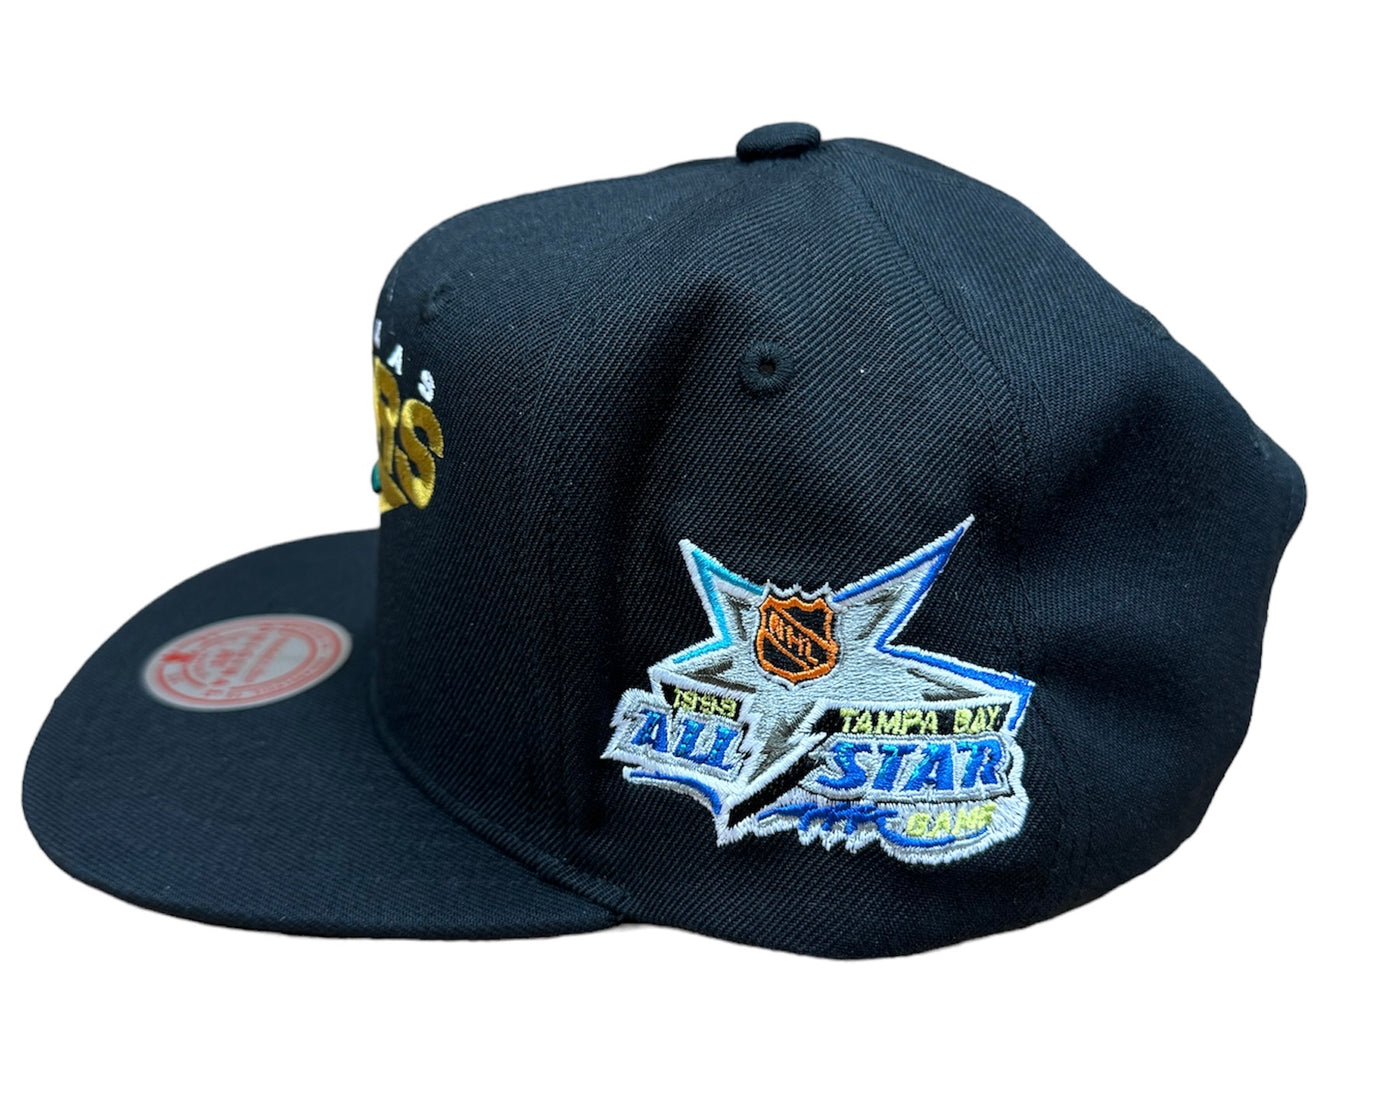 DALLAS STARS MITCHELL & NESS MIKE MODANO 1999 ALL-STAR PATCH CAP - left side view 